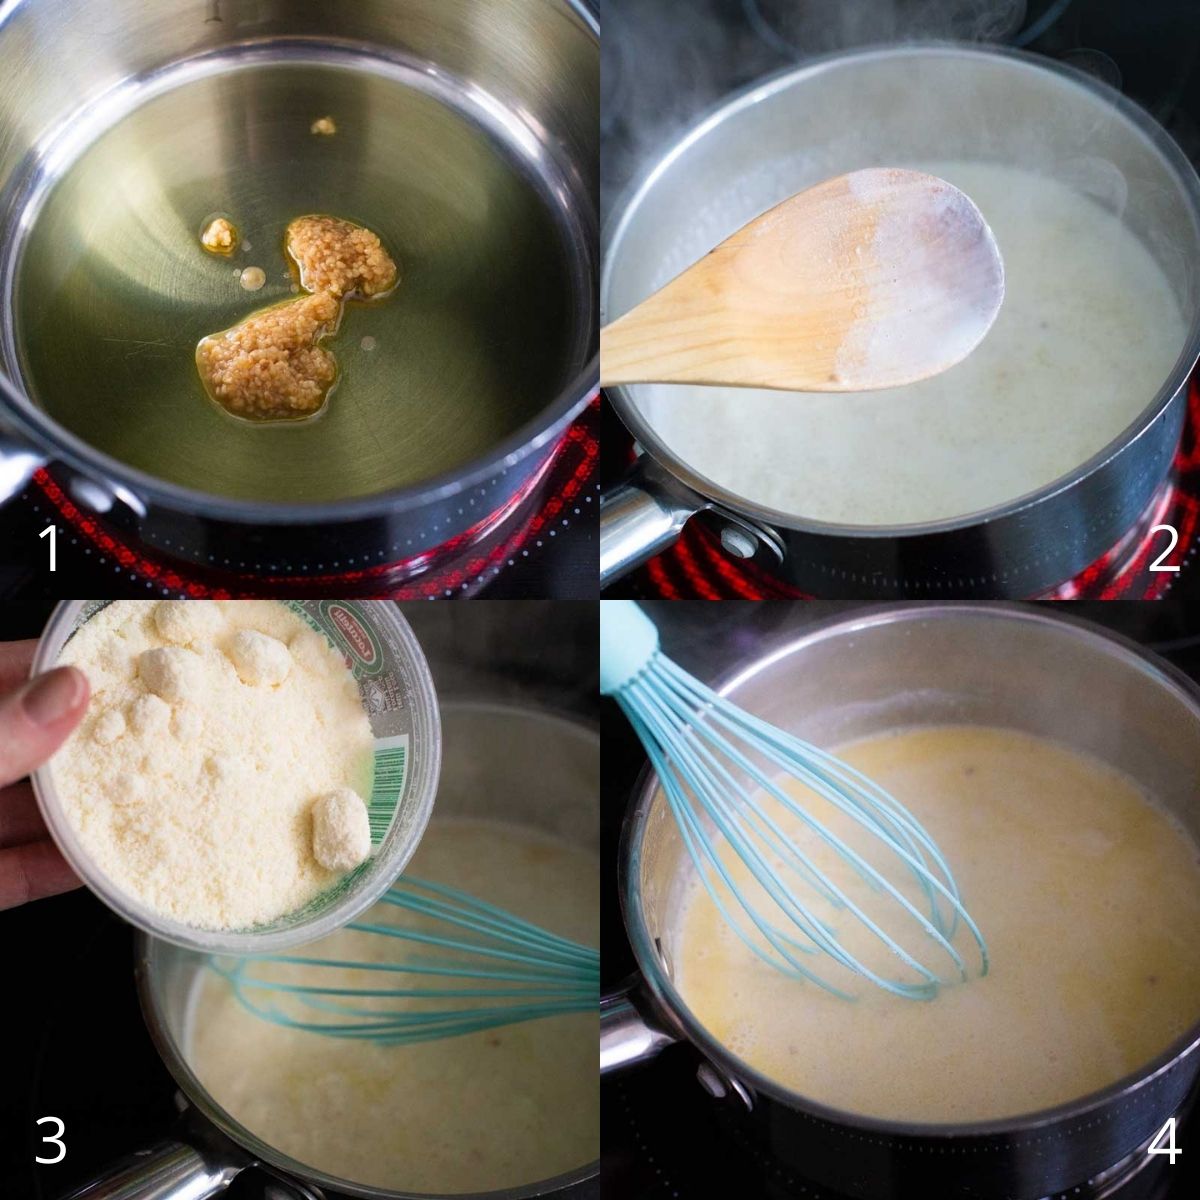 Step by step photos show how to cook the garlic and build the cream sauce with grated cheese in a saucepan.